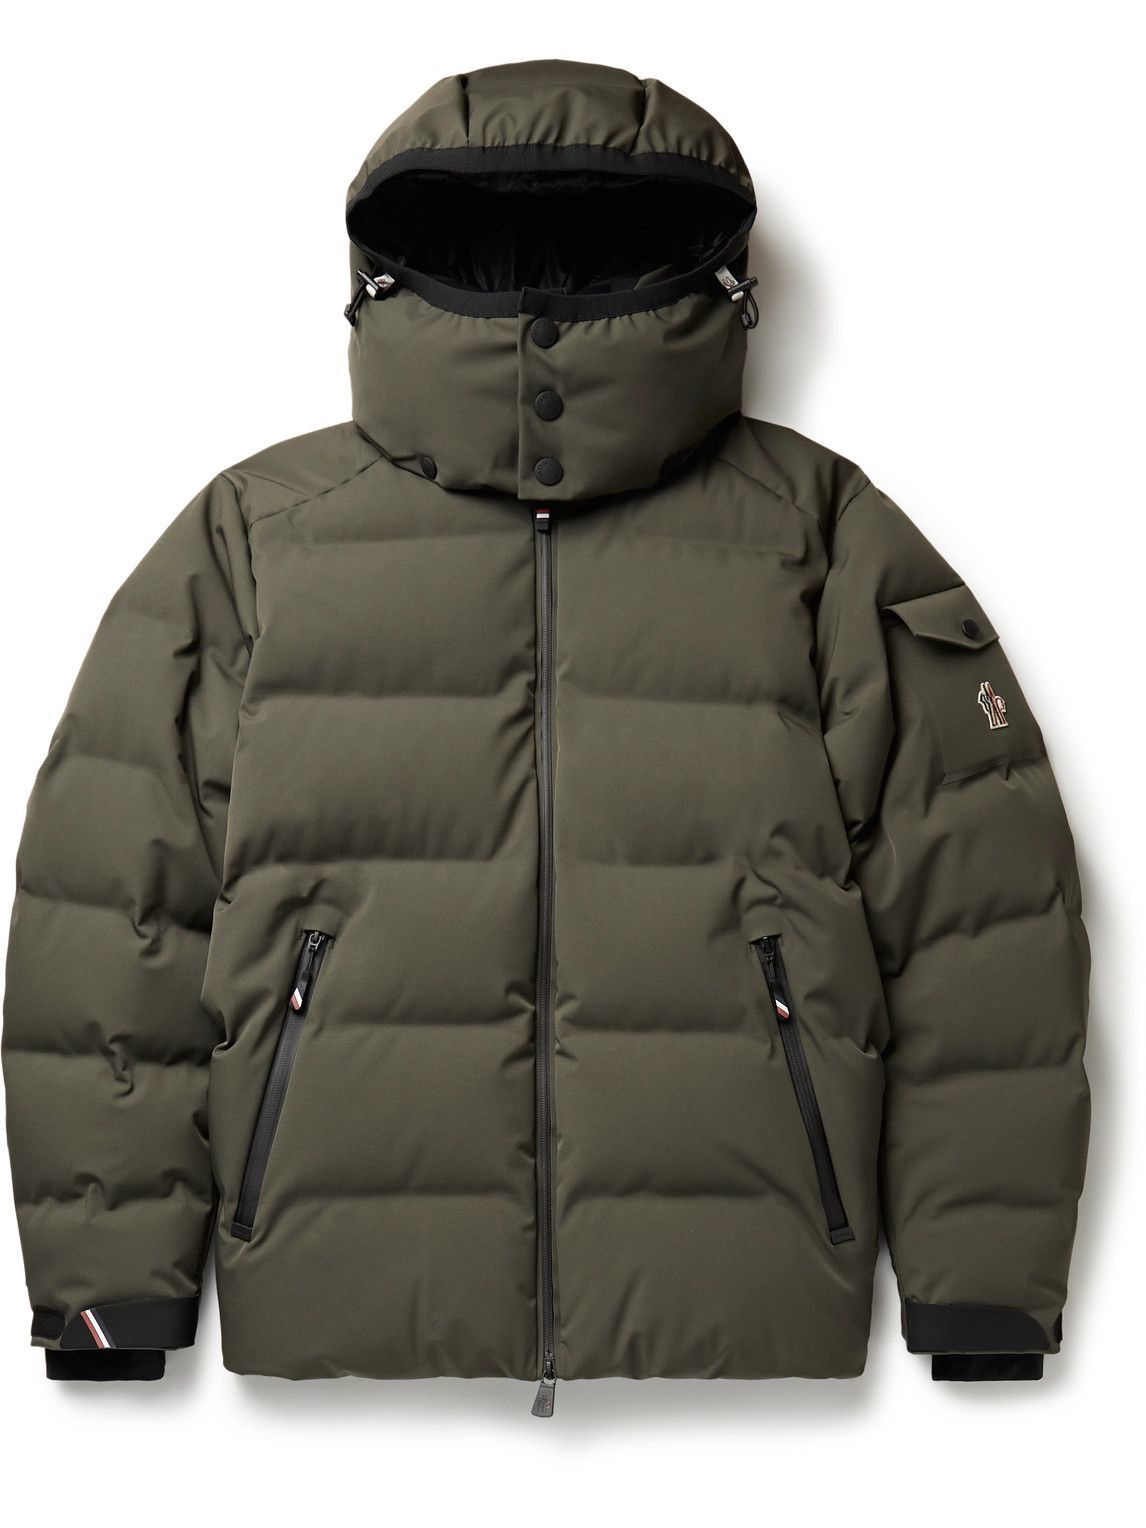 Blue Montgetech quilted down ski jacket, Moncler Grenoble